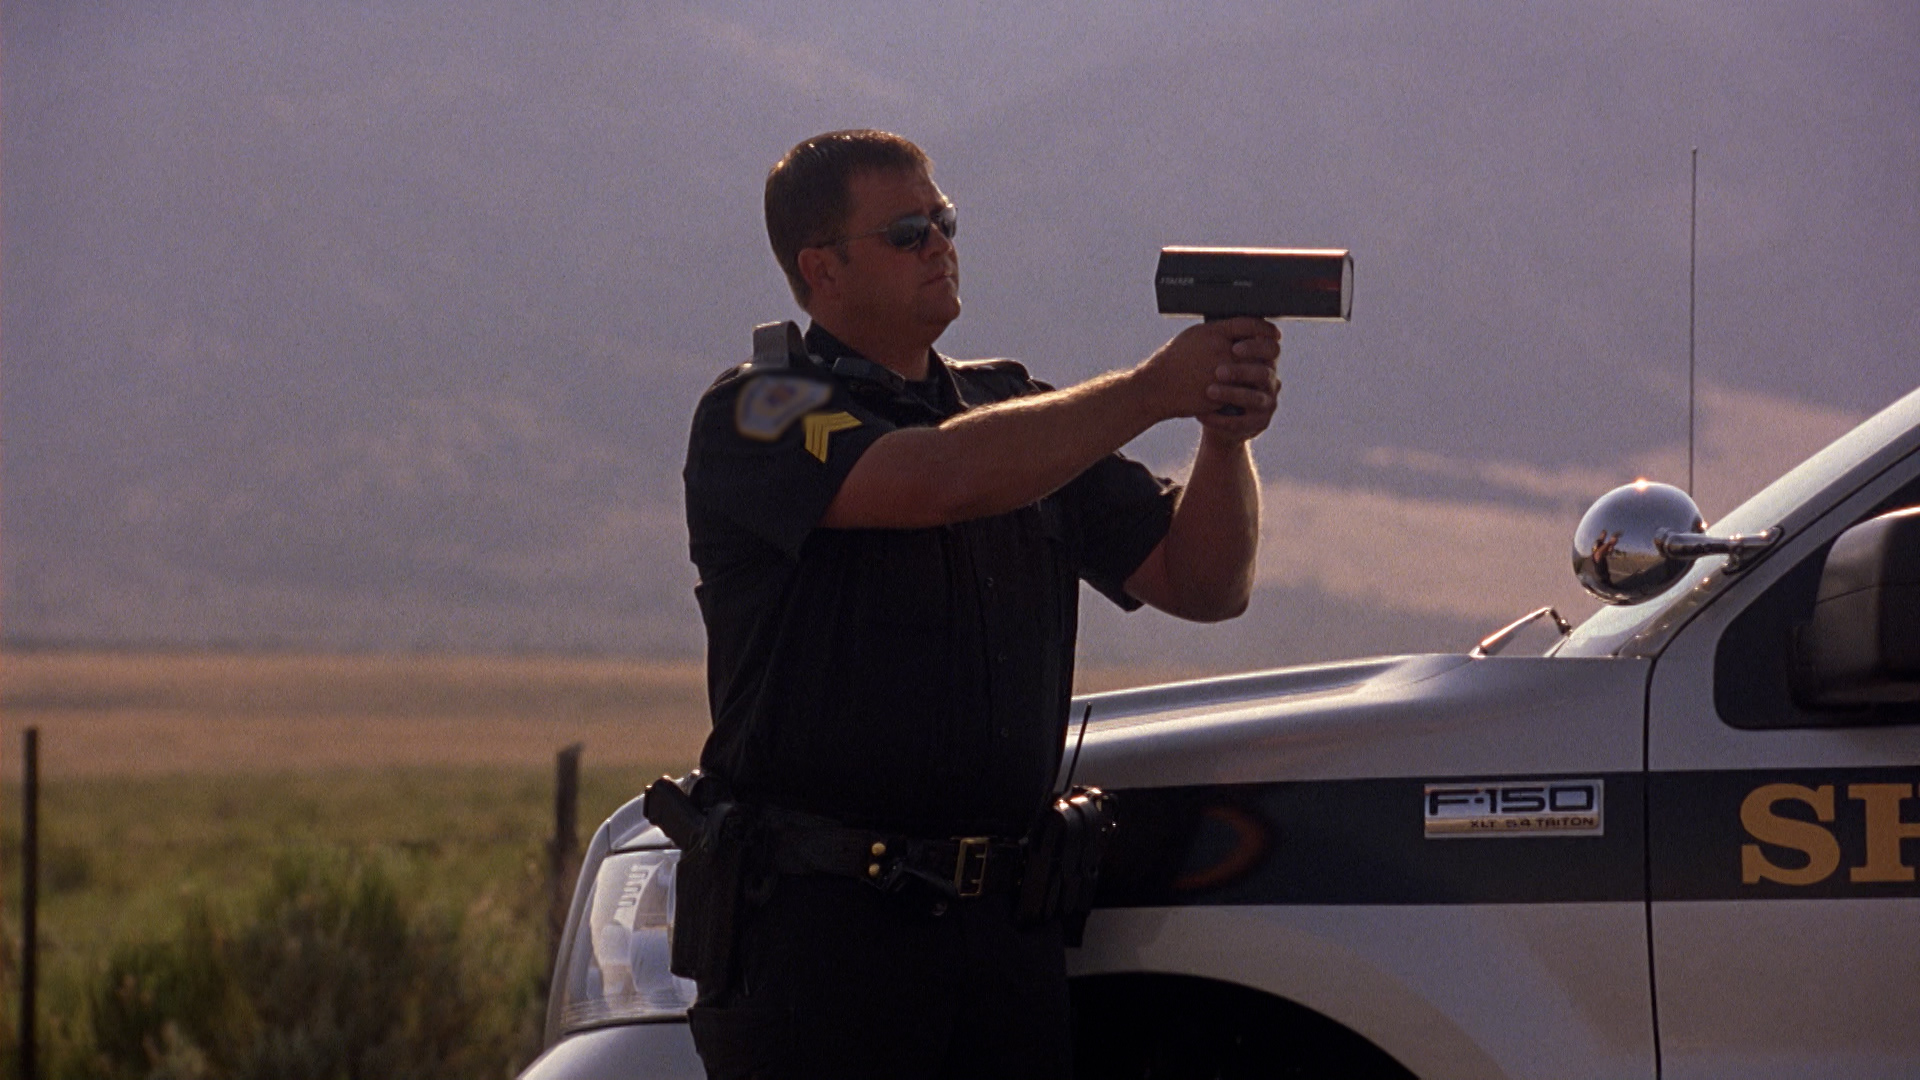 This is an image of a policeman holding a radar gun next to his vehicle.